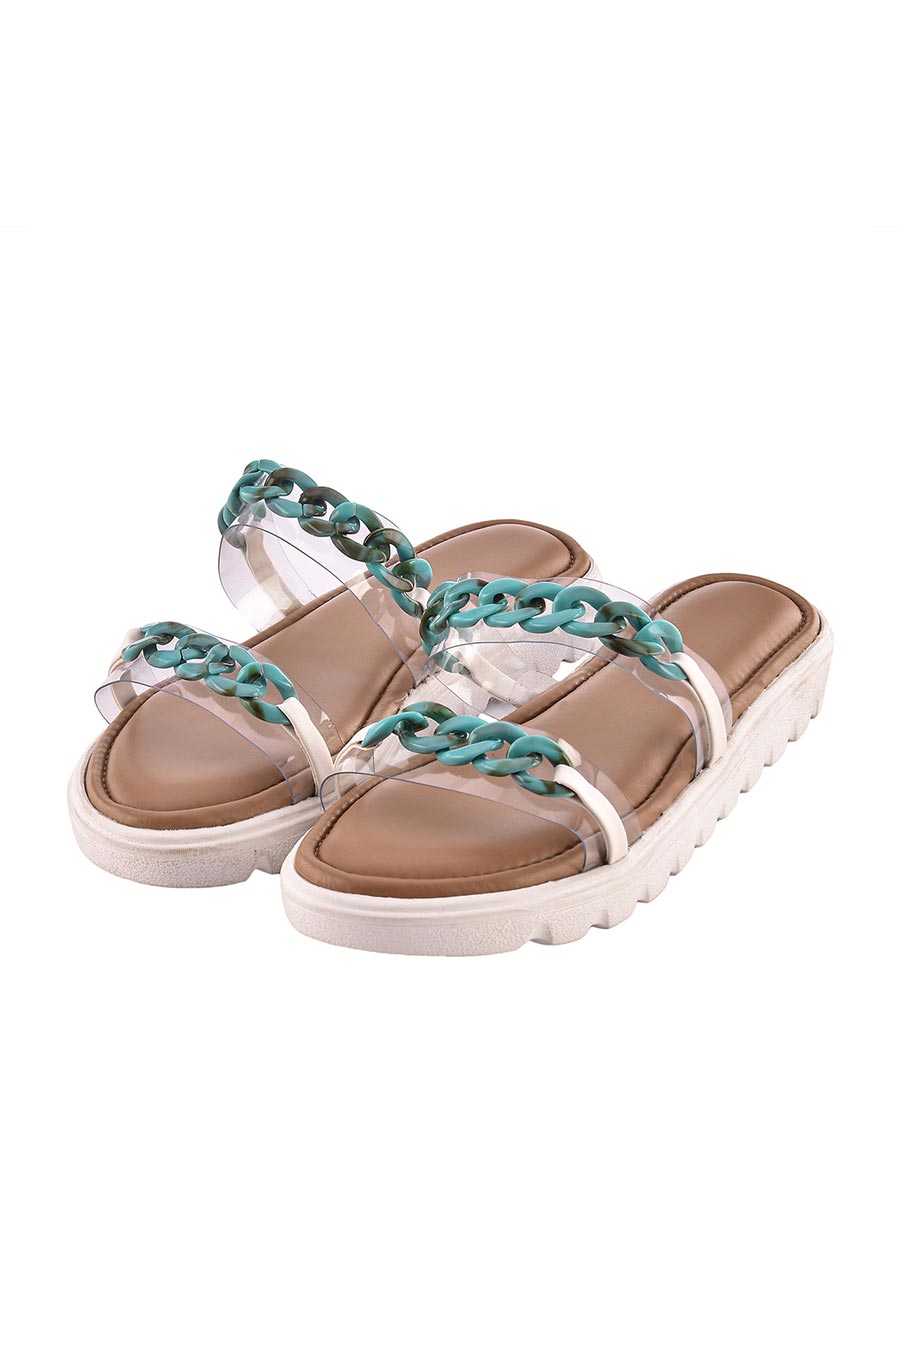 Nude Comfort Flats With Turquoise Chain